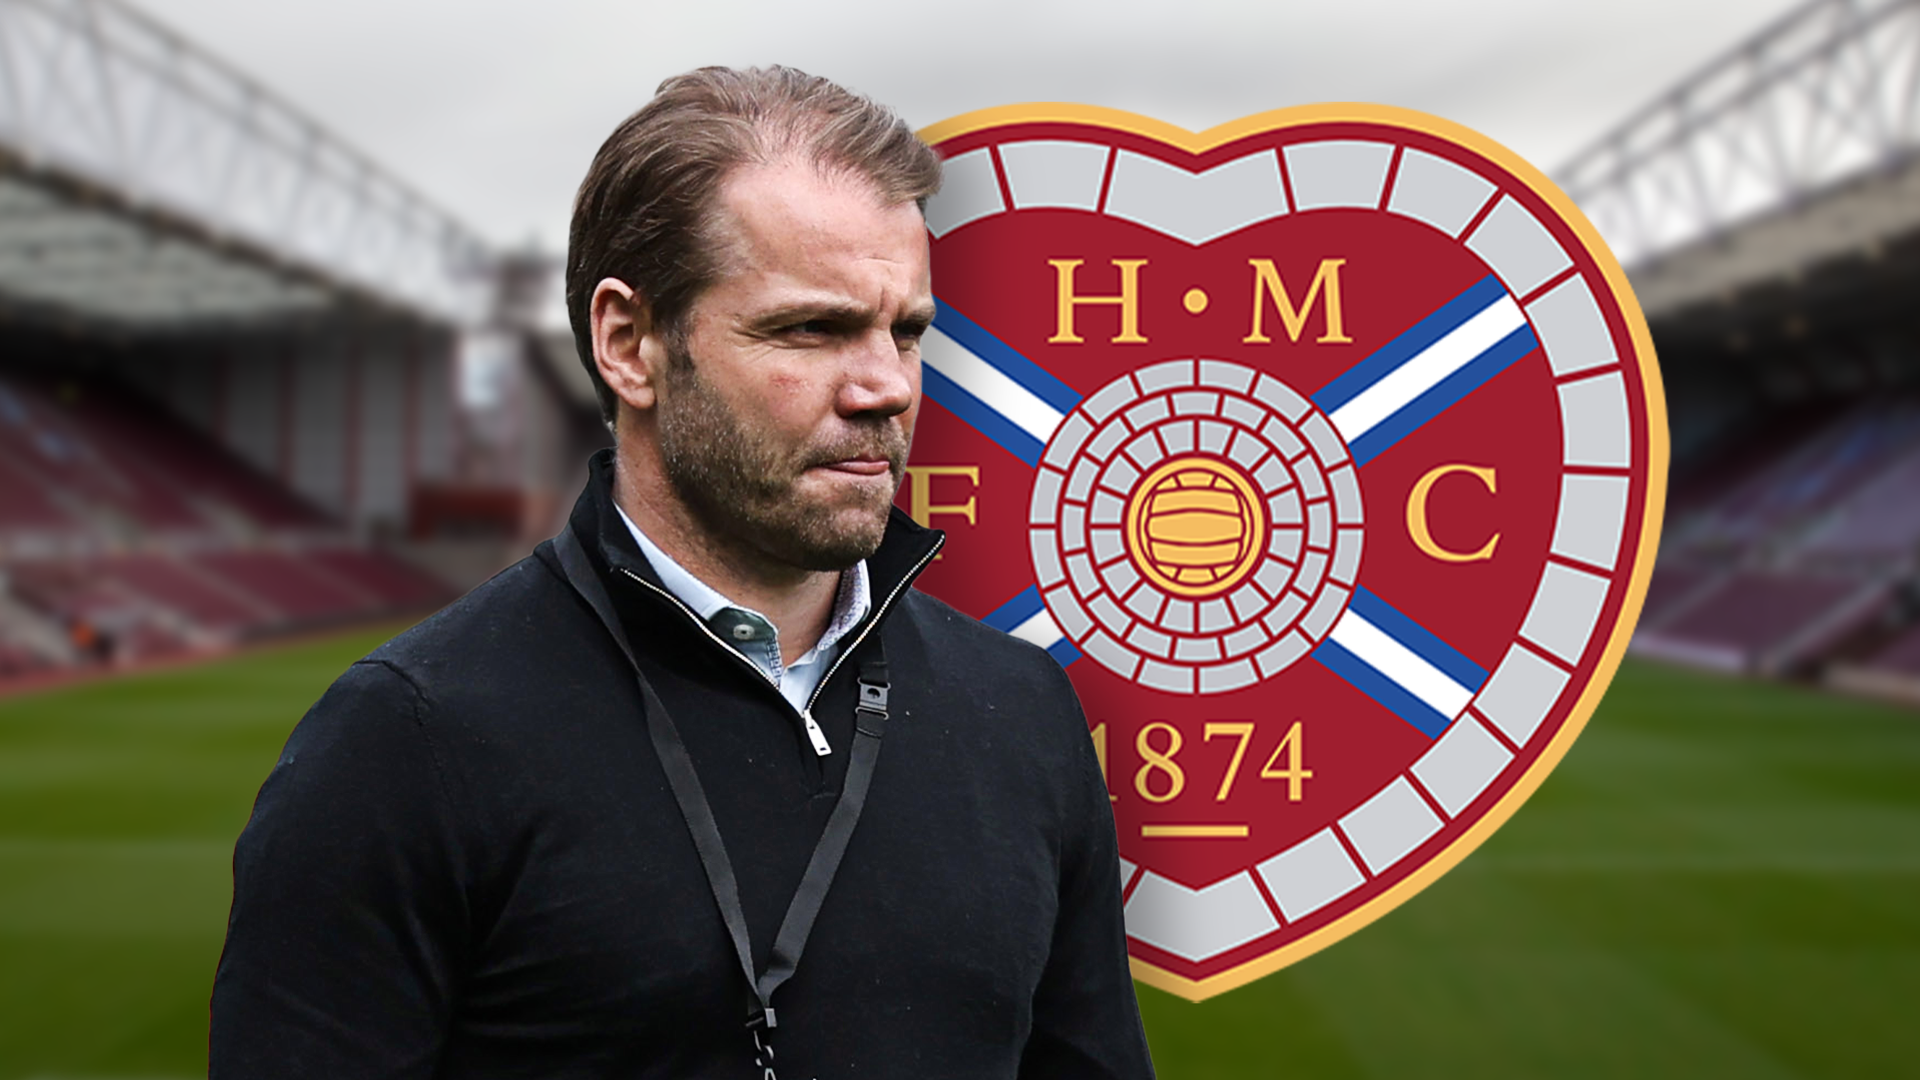 Hearts fixtures: Jambos start with visit of Ross County